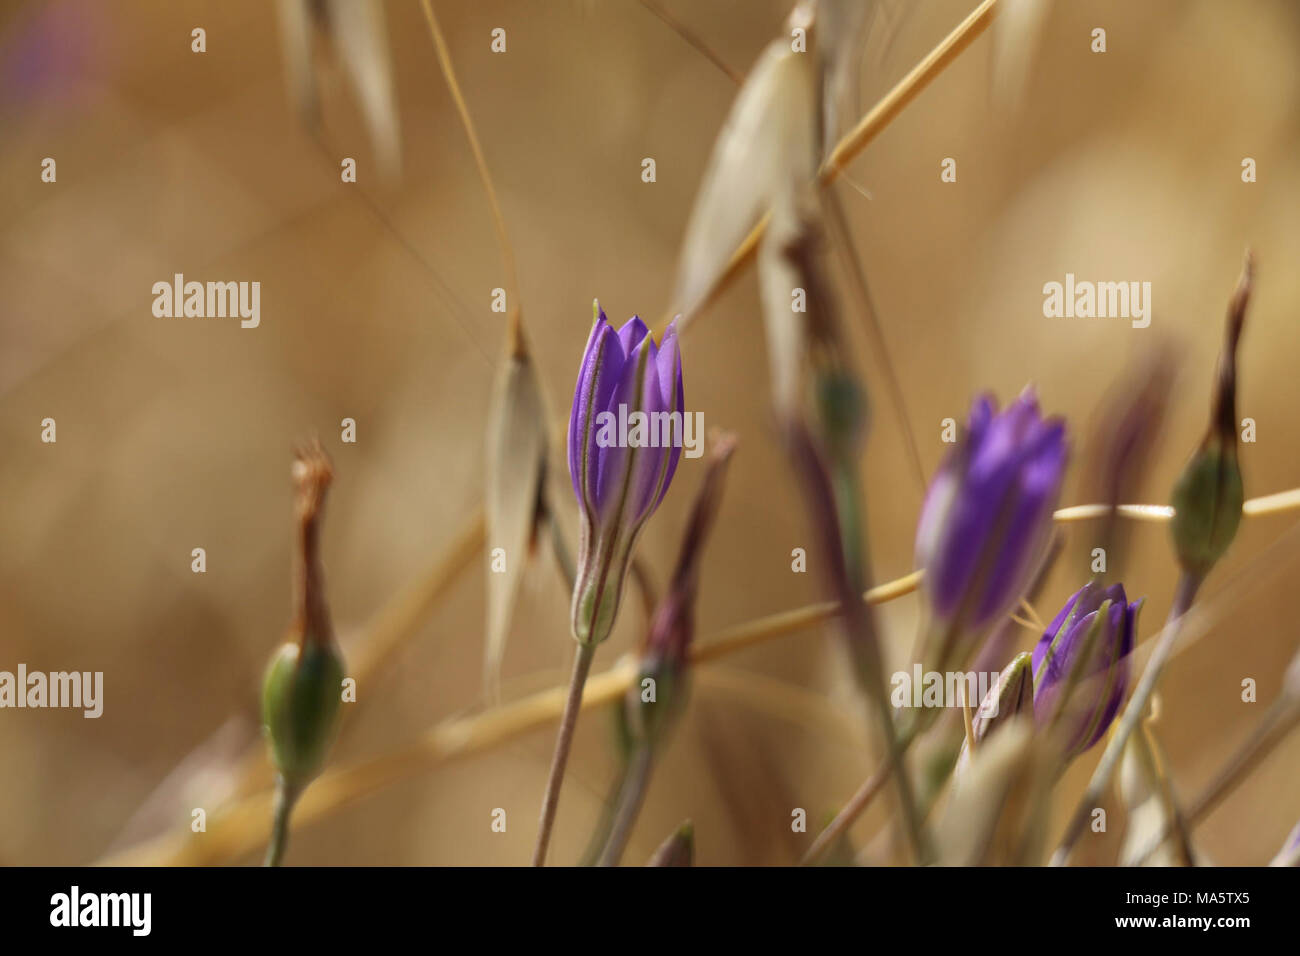 Thread-leaved brodiaea waking up in the morning. Stock Photo